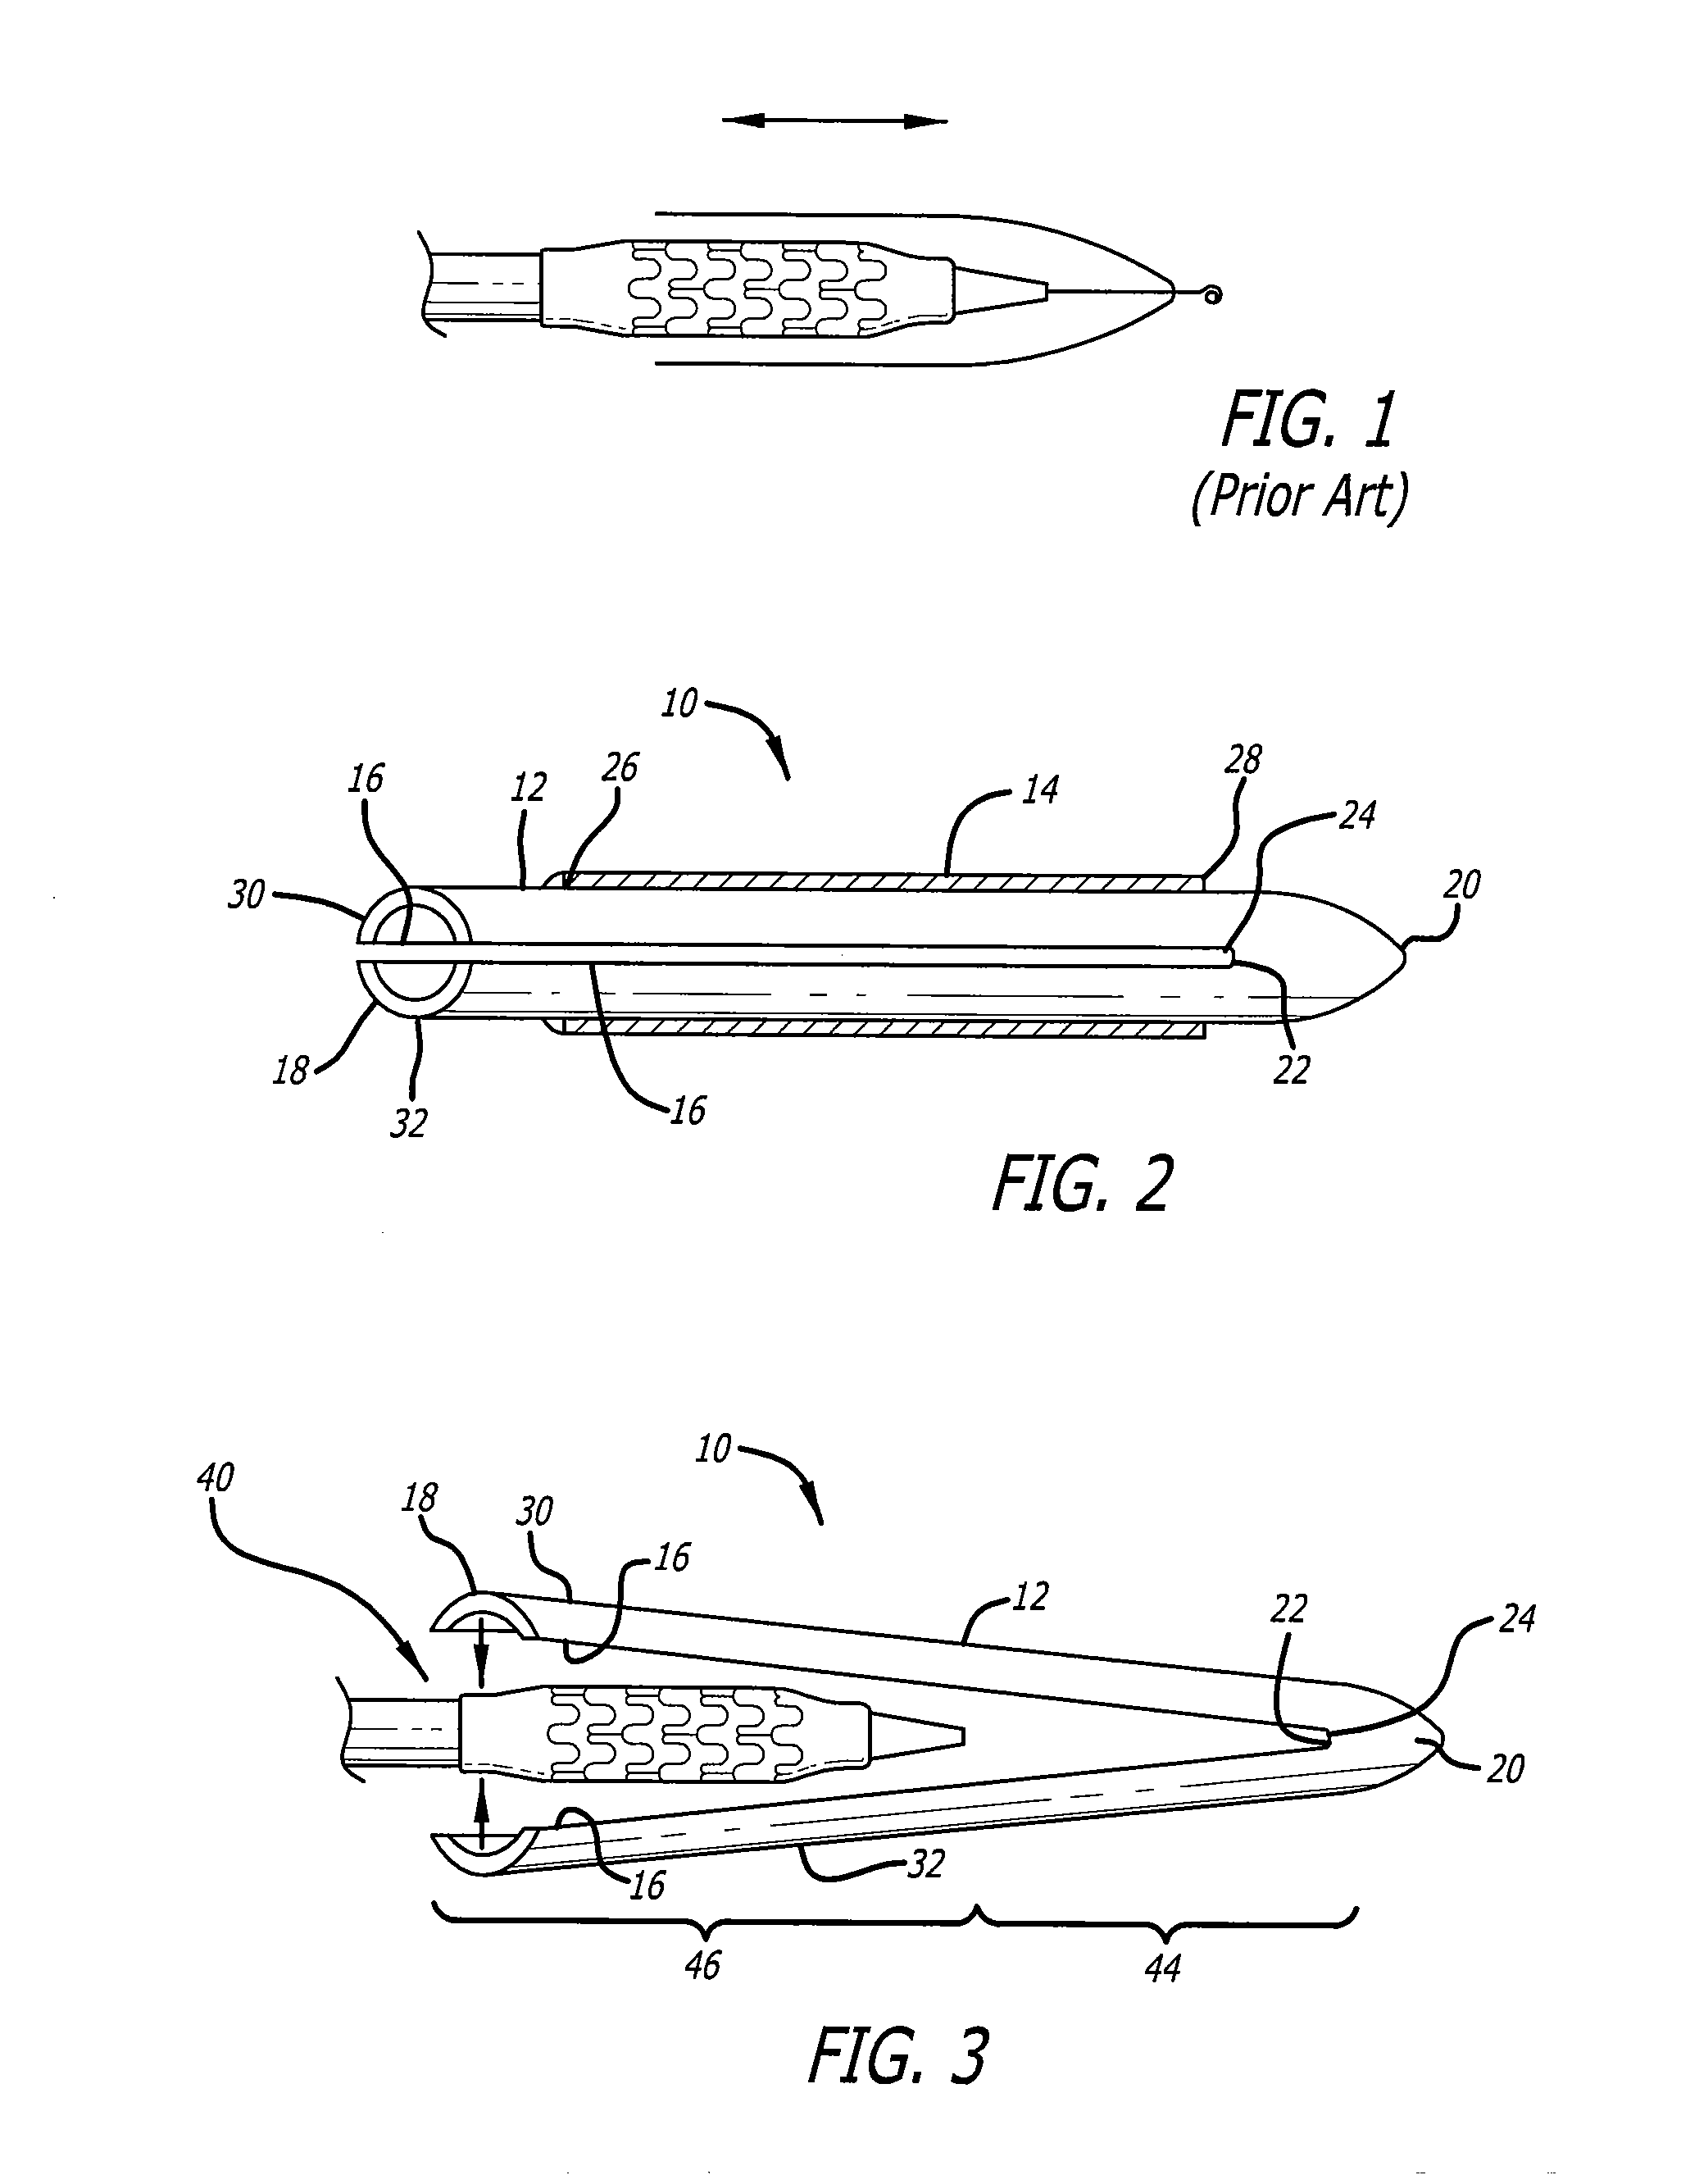 Dual sheath assembly and method of use